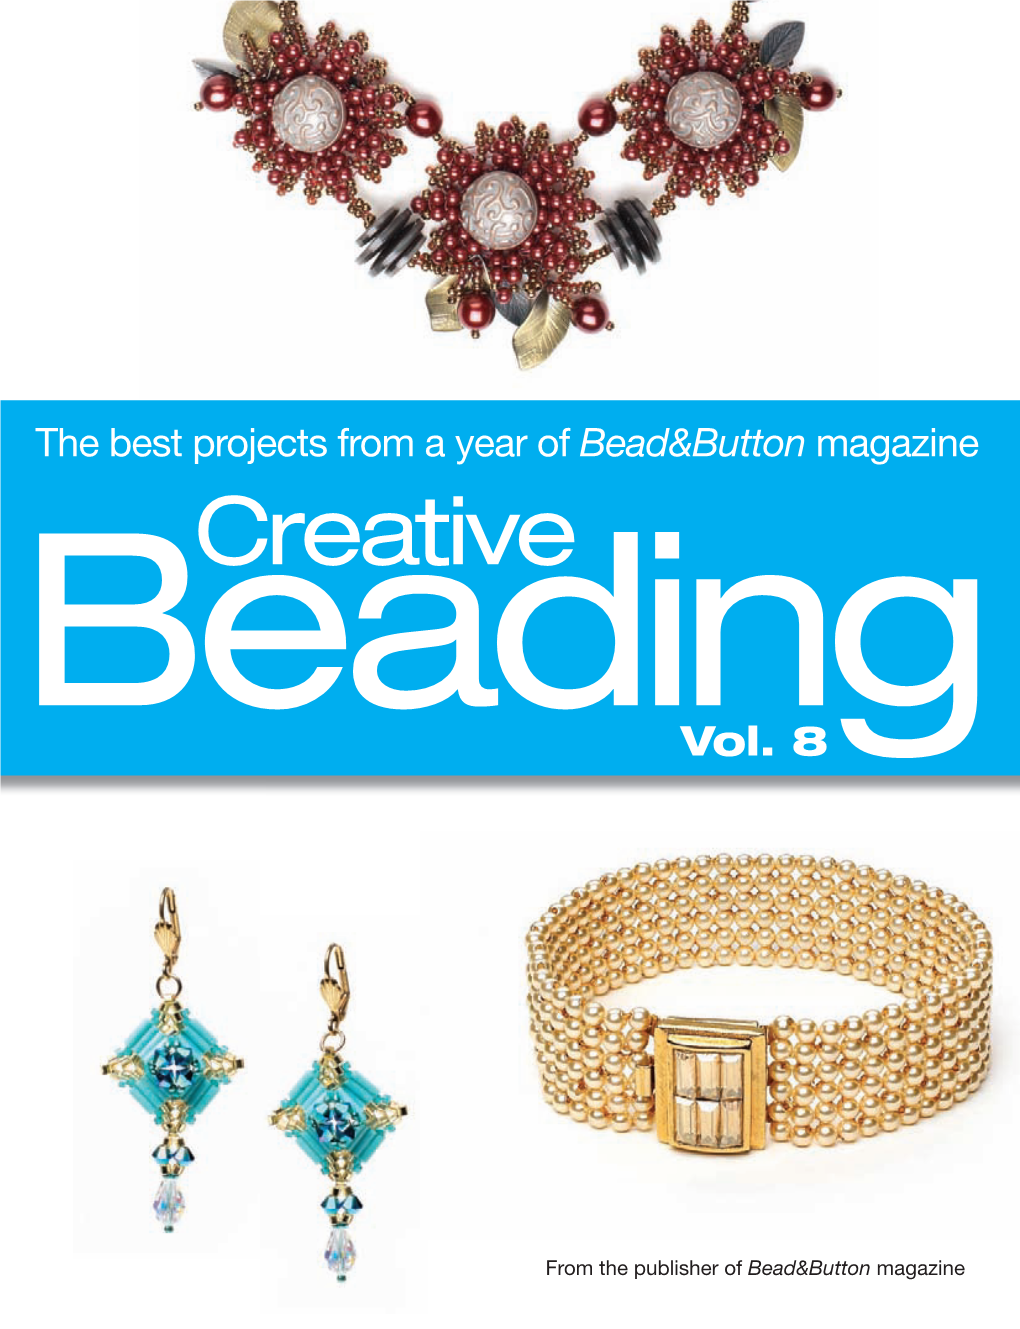 The Best Projects from a Year of Bead&Button Magazine